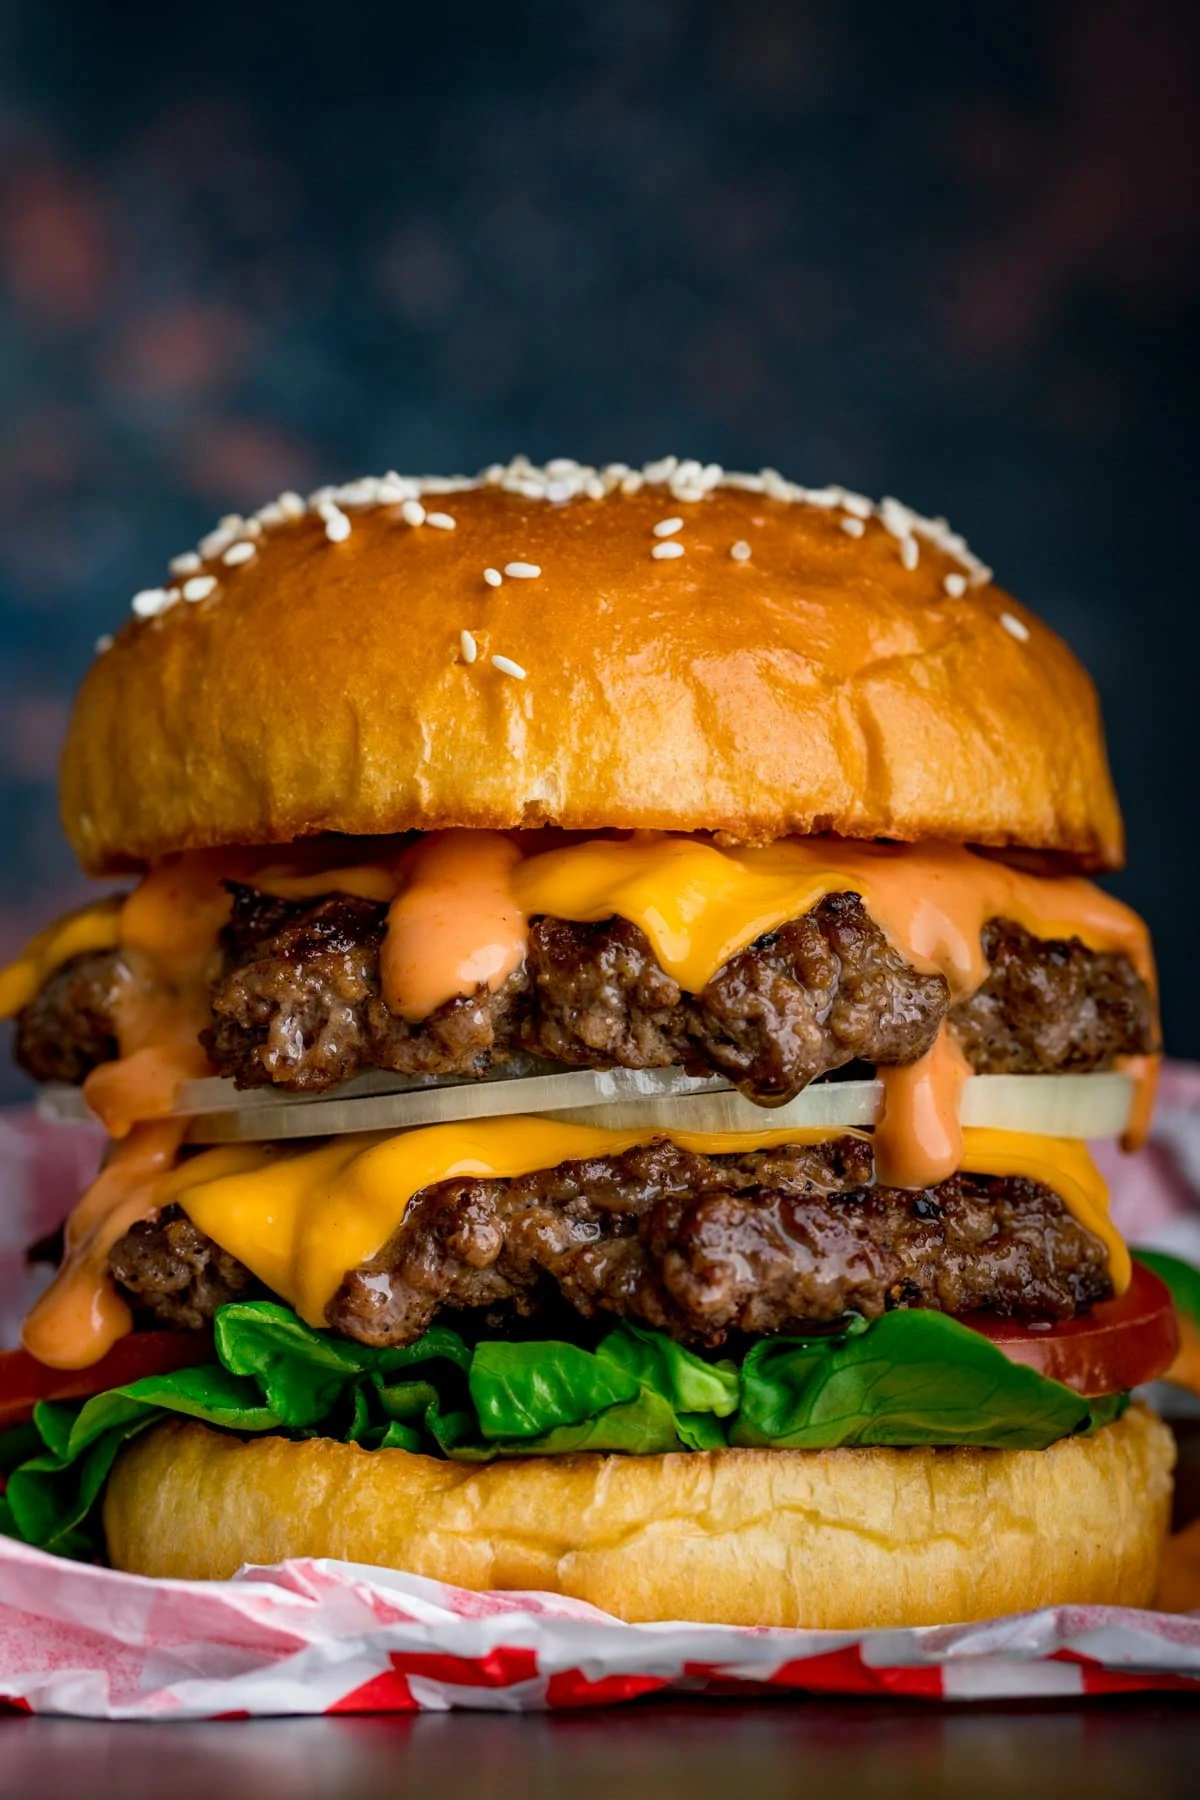 Close up image of a double cheeseburger on a burger wrapper against a dark background.